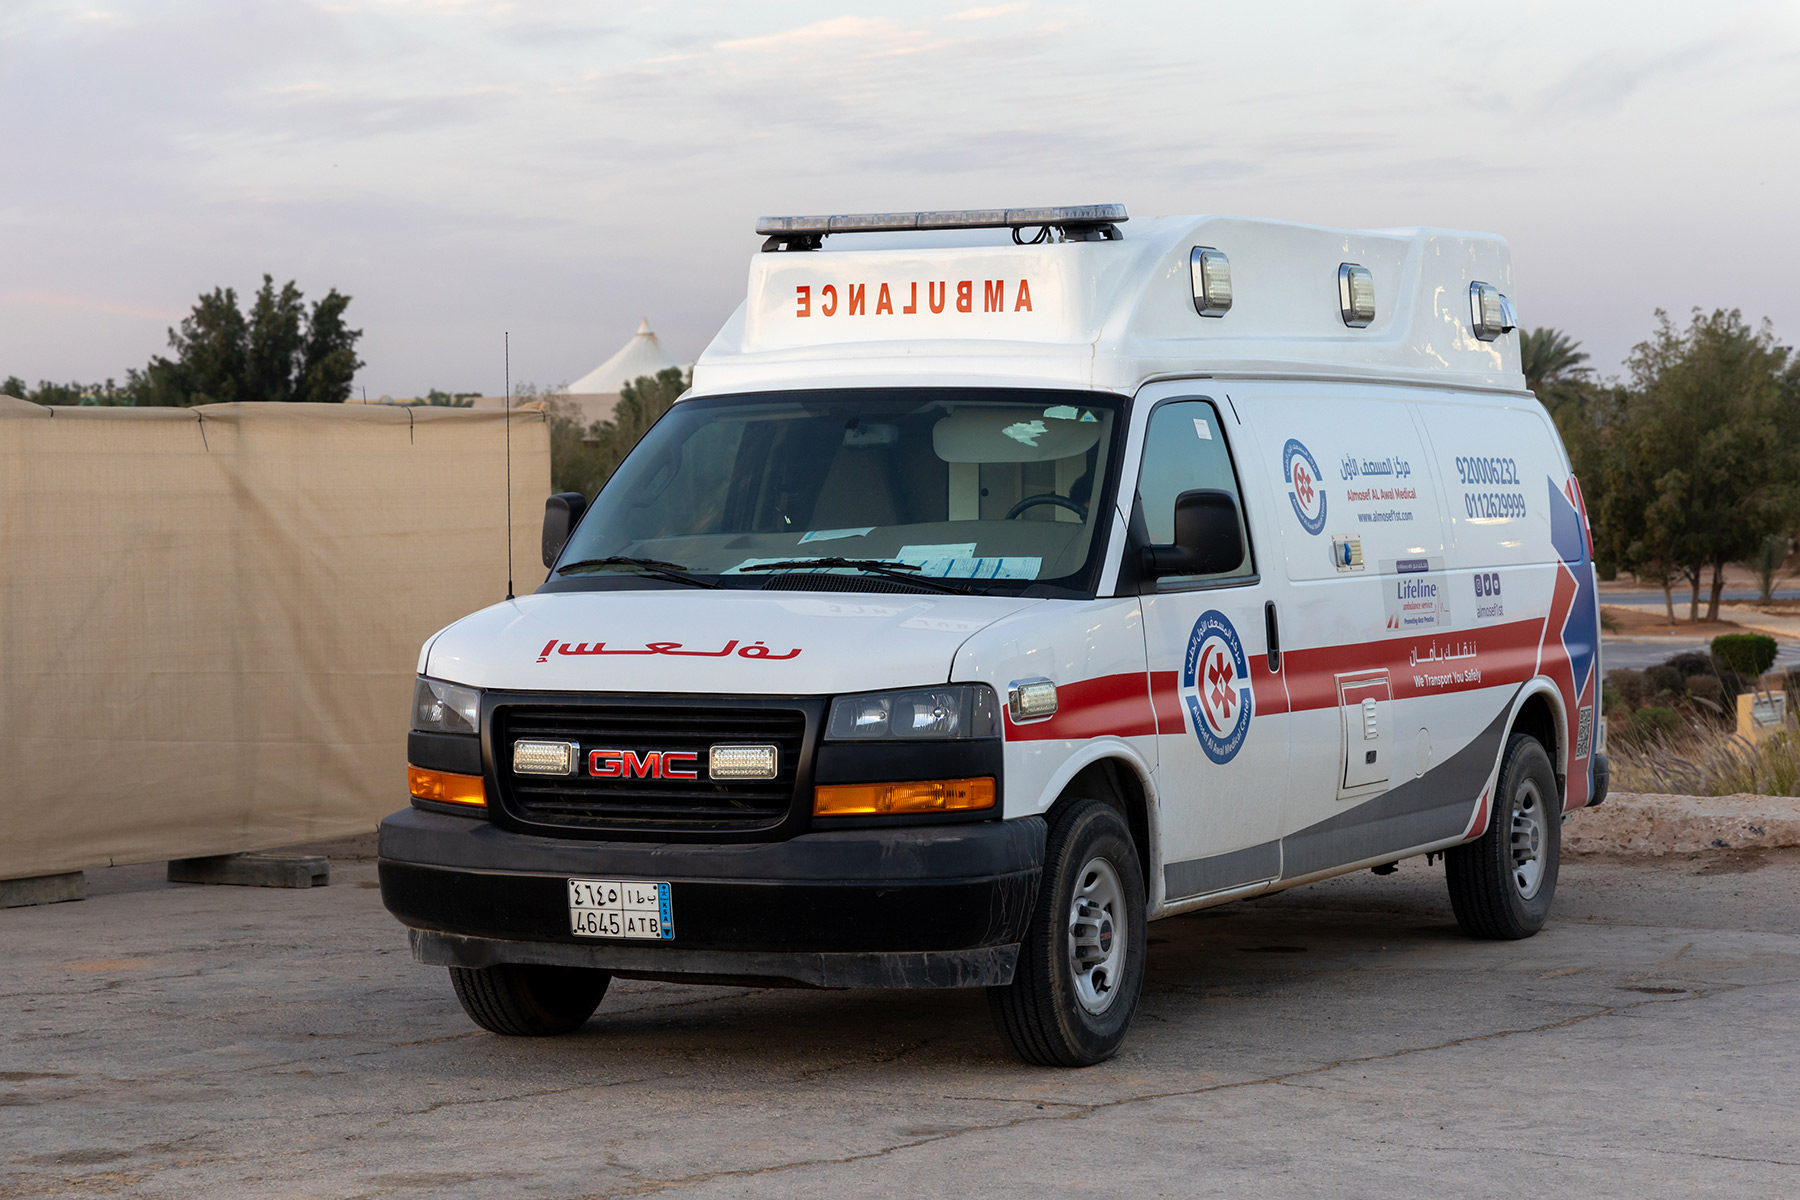 Saudi ambulance with labels in English and Arabic